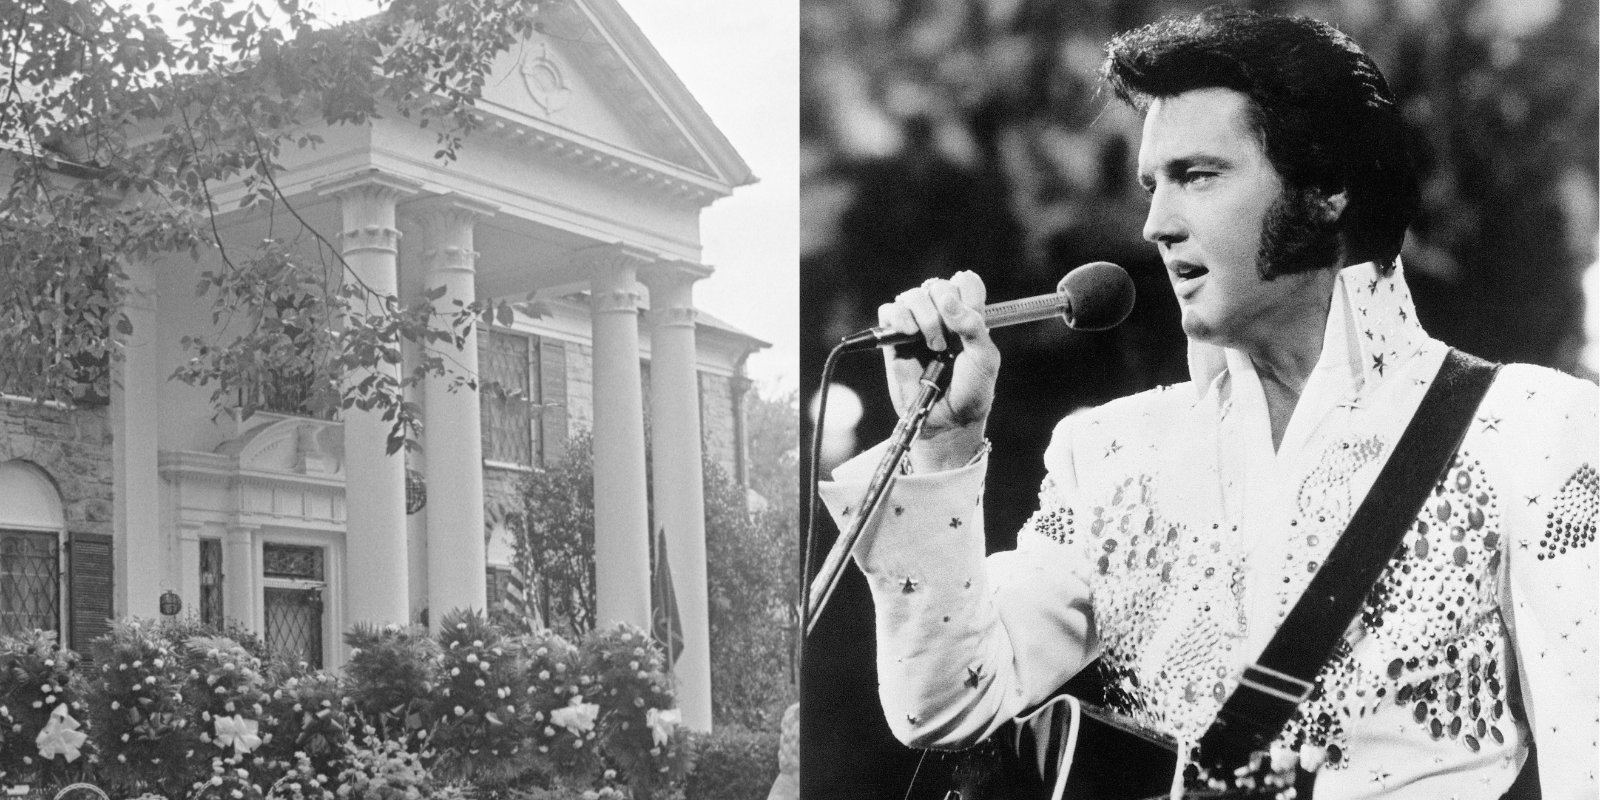 Side by side photographs of Graceland in Memphis, TN and an image of Elvis Presley.